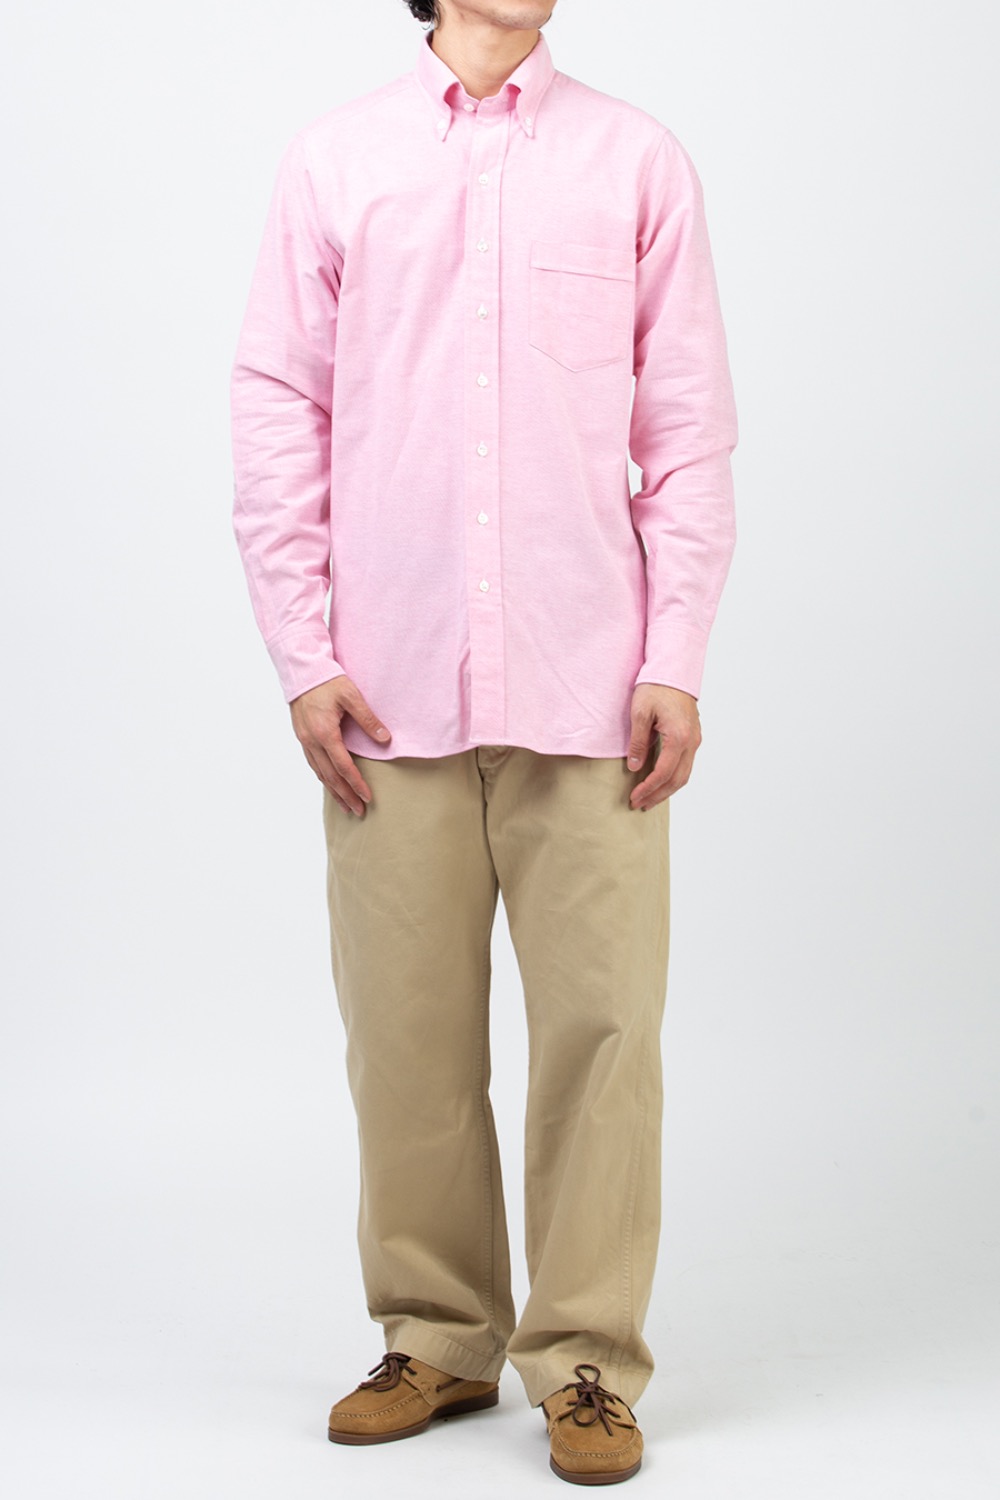 (CARRY OVER) DARK PINK BUTTON DOWN OXFORD SHIRT